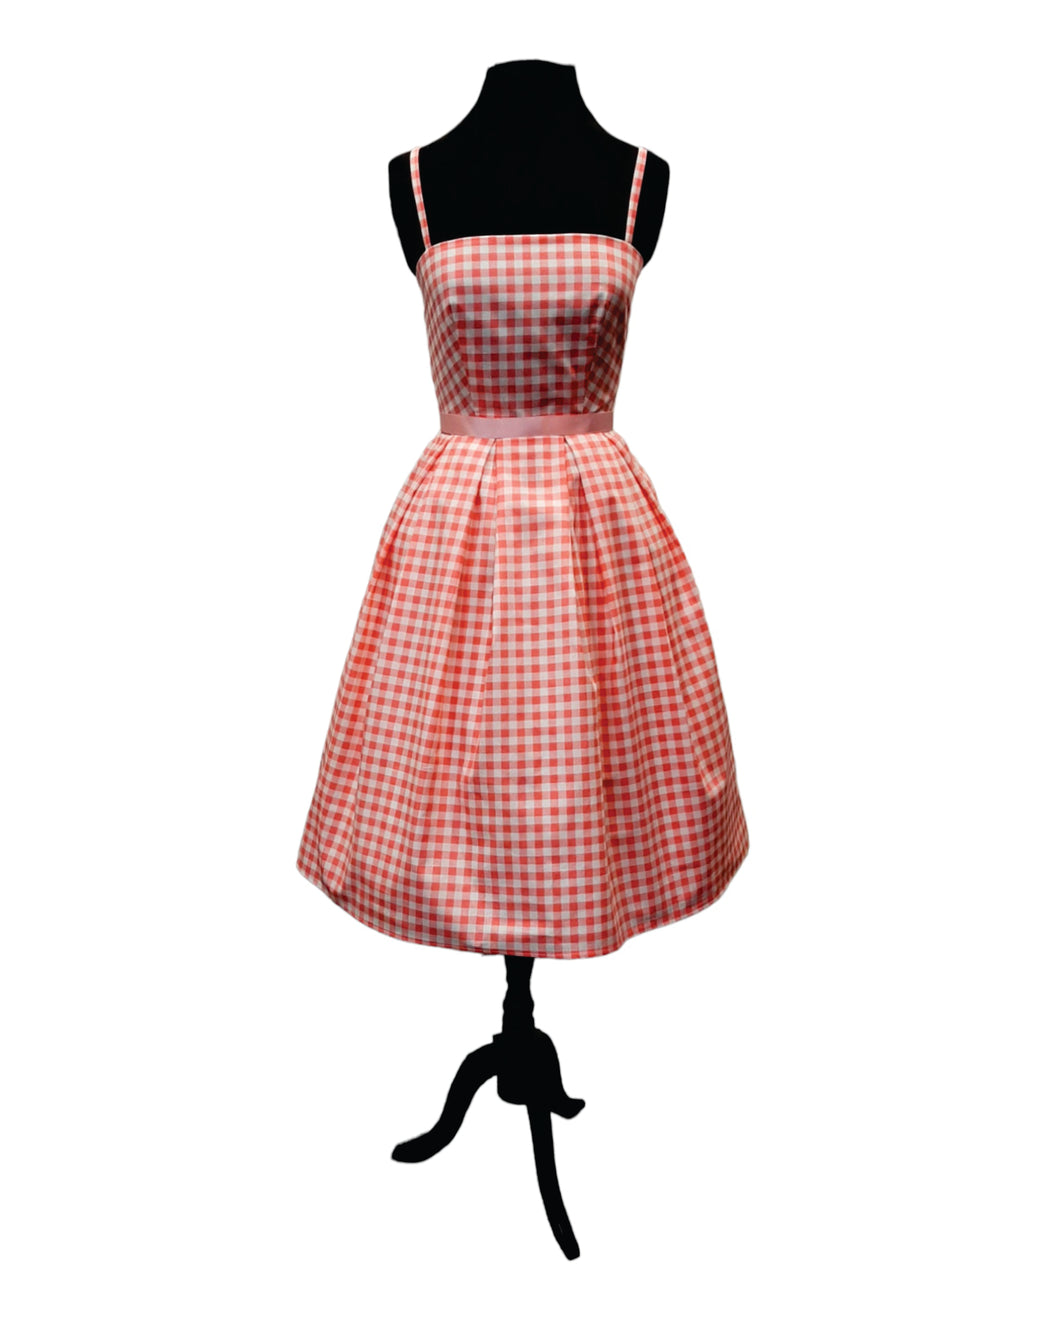 Barbie Inspired Pink and White Gingham Dress with Straps